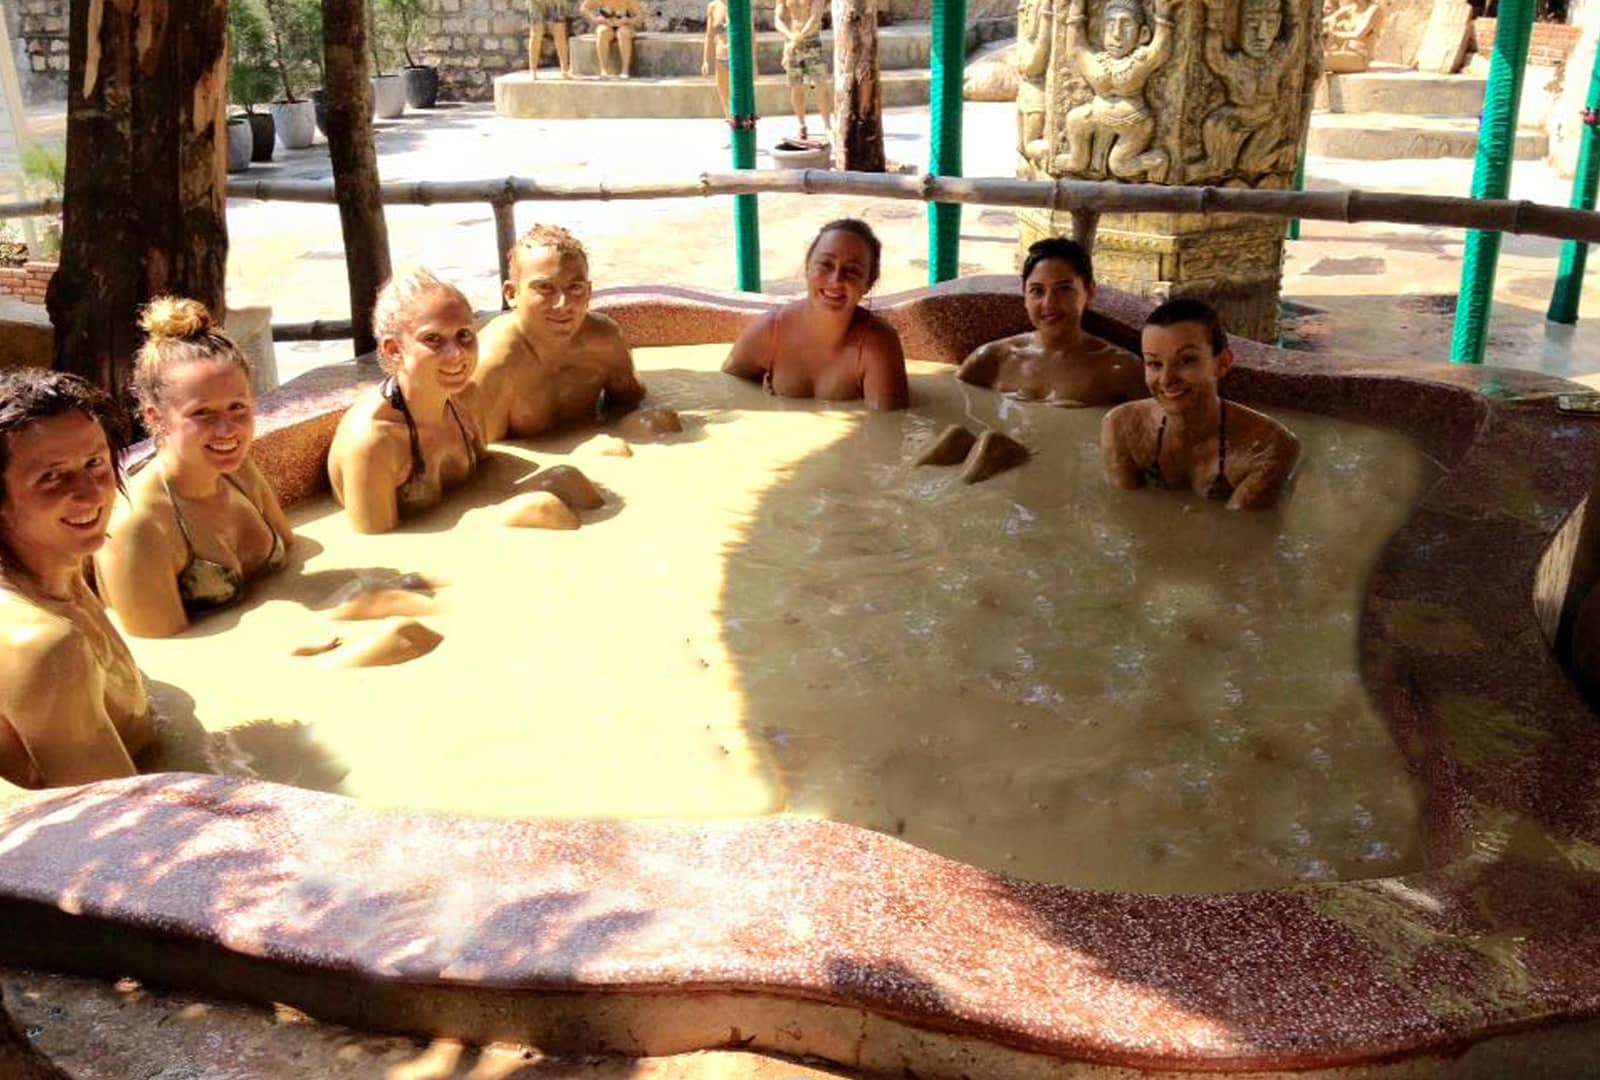 Rejuvenate, relax, and heal your soul with an invigorating dip in the naturally healing hot springs of Thap Ba Hot Springs in Nha Trang